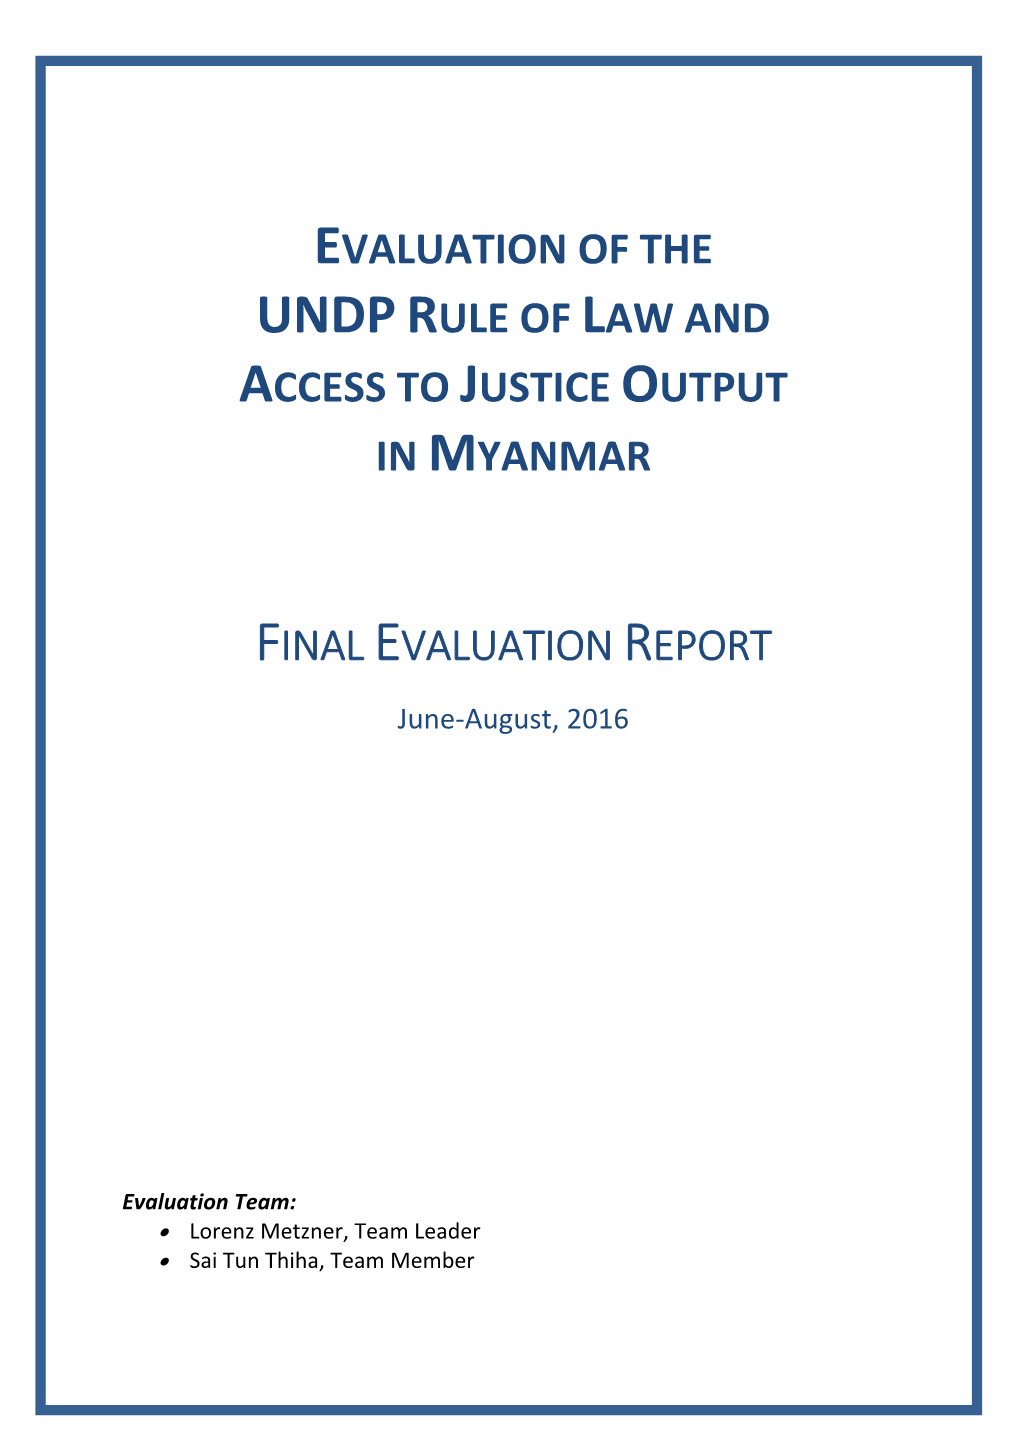 Evaluation of the Undp Rule of Law and Access to Justice Output in Myanmar